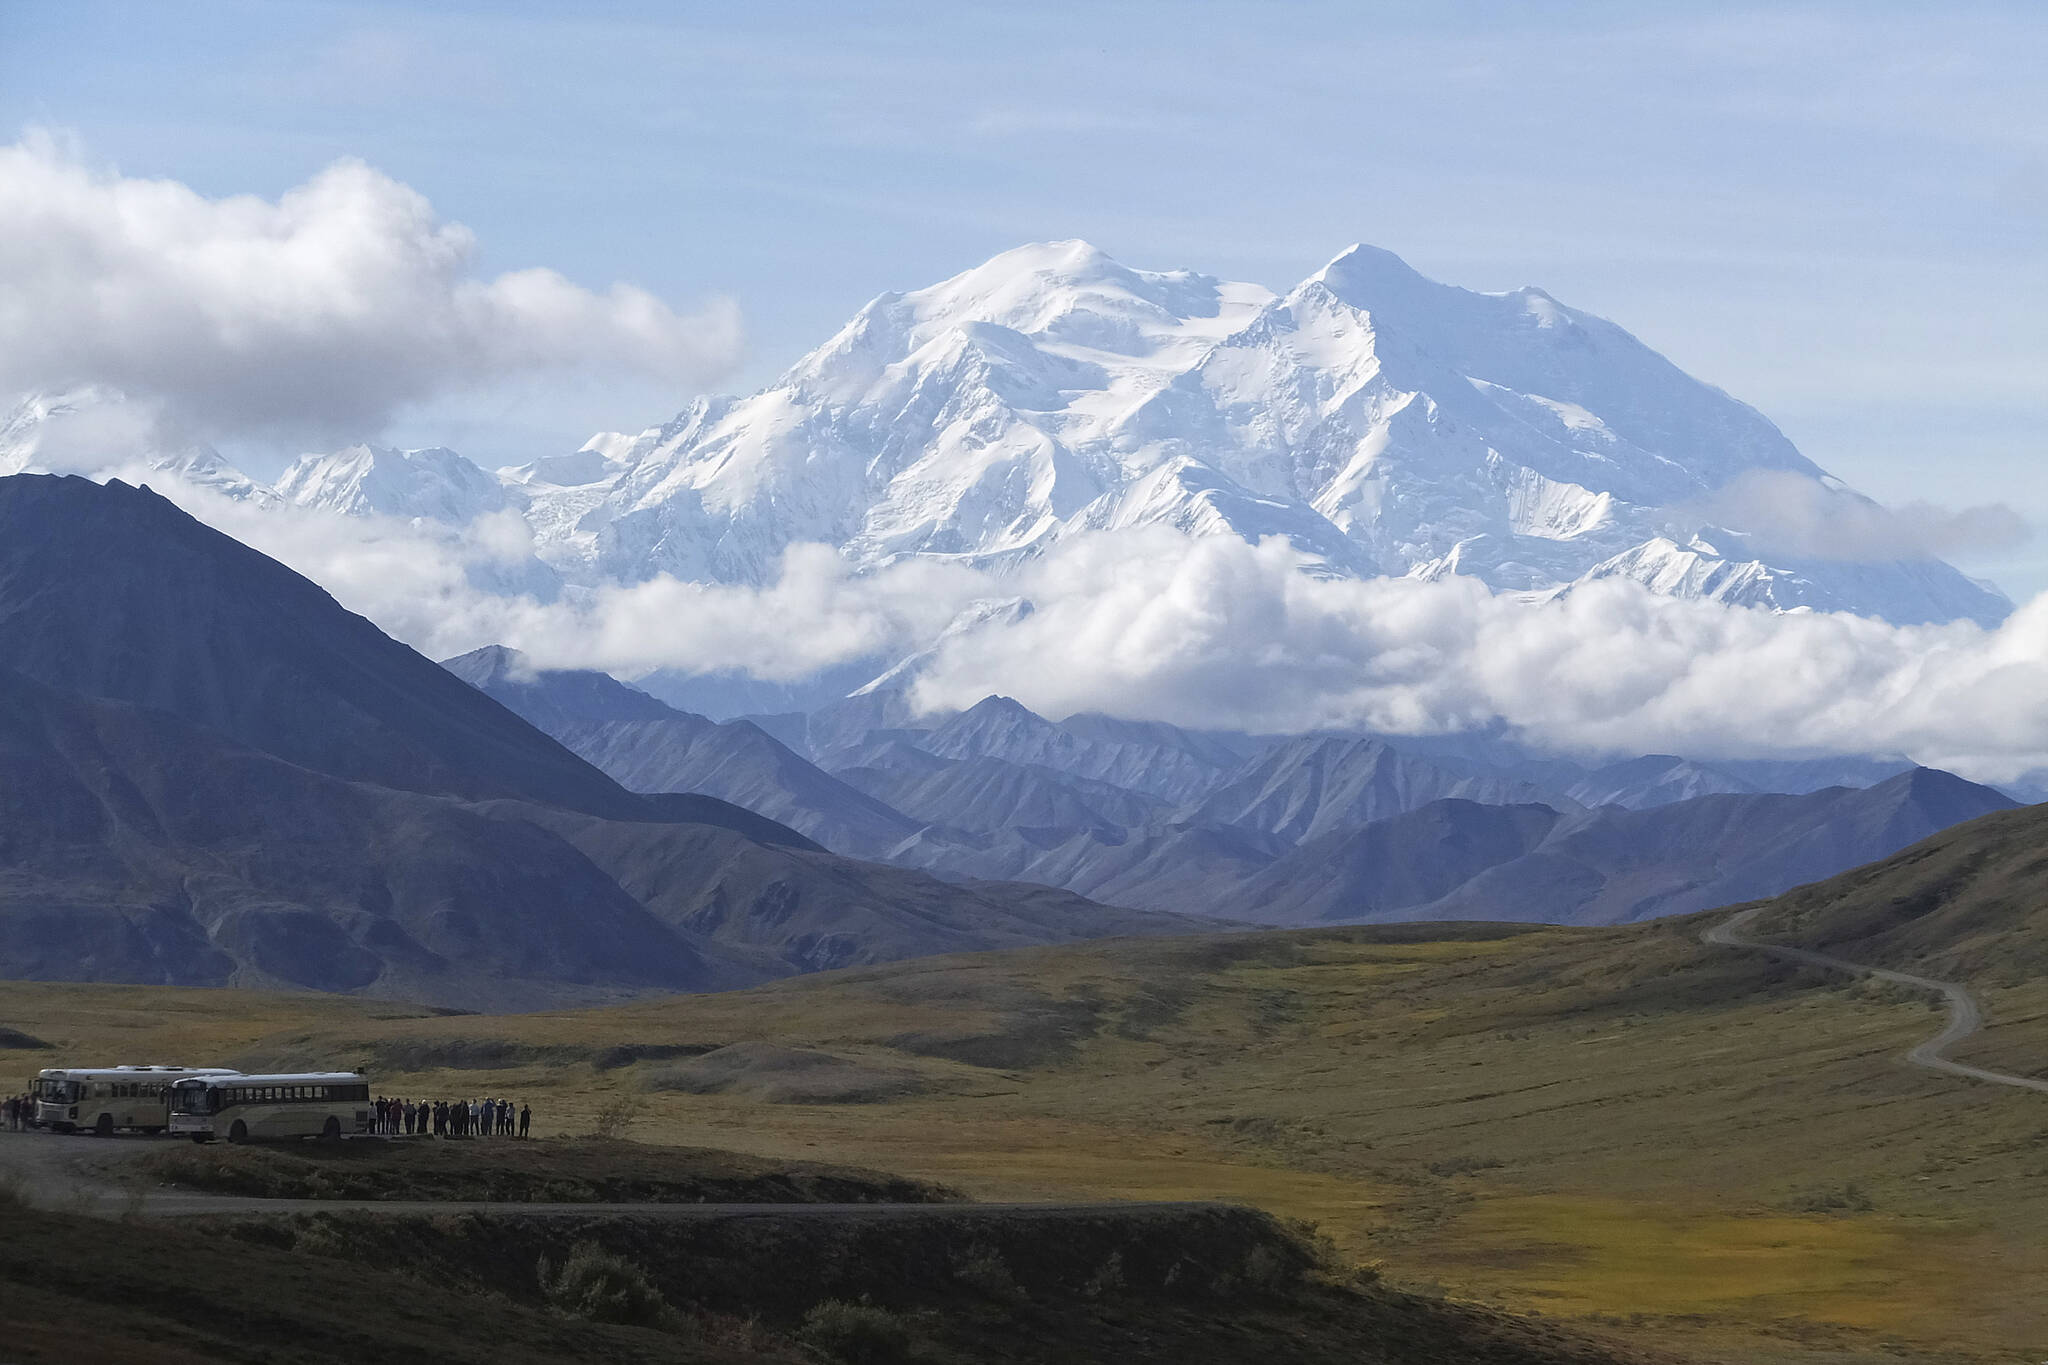 Sightseeing buses and tourists are seen at a pullout popular for taking in views of North America's tallest peak, Denali, in Denali National Park and Preserve, Alaska, on Aug. 26, 2016. The U.S. Interior Department plans to use $25 million in federal infrastructure funds on a bridge project over a slumping section of the only road into Denali National Park and Preserve. Park officials have attributed the accelerated slumping to climate change, and closed about half the 92-mile park road until they can address the repairs. (AP Photo / Becky Bohrer)